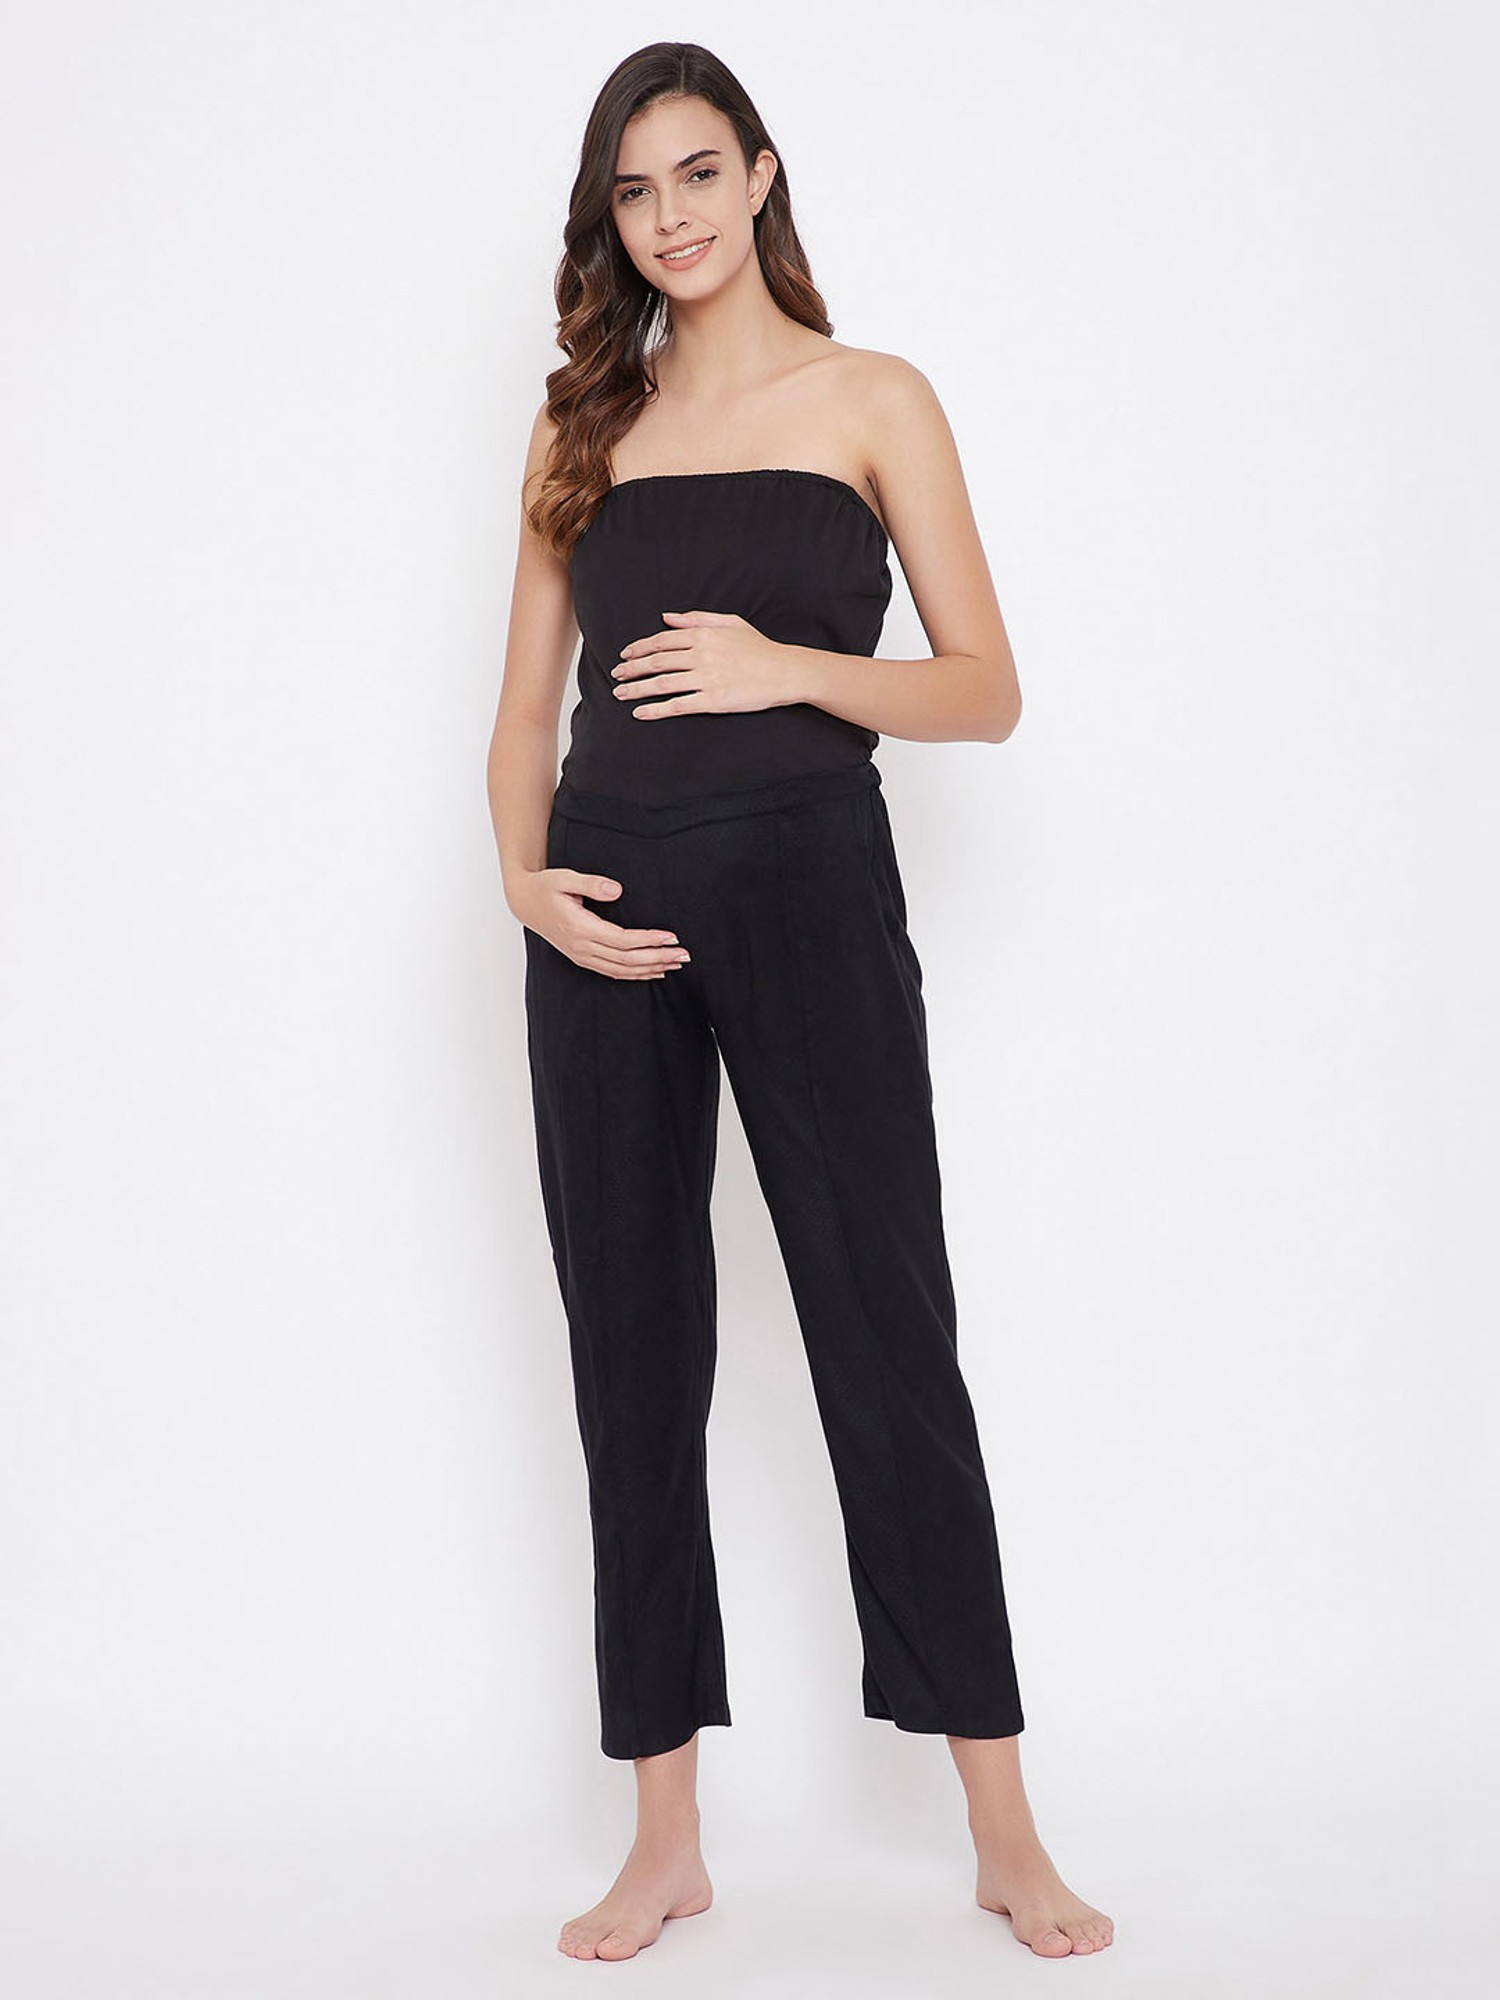 Luethbiezx Maternity Clothes Pregnancy Trousers For Pregnant India | Ubuy